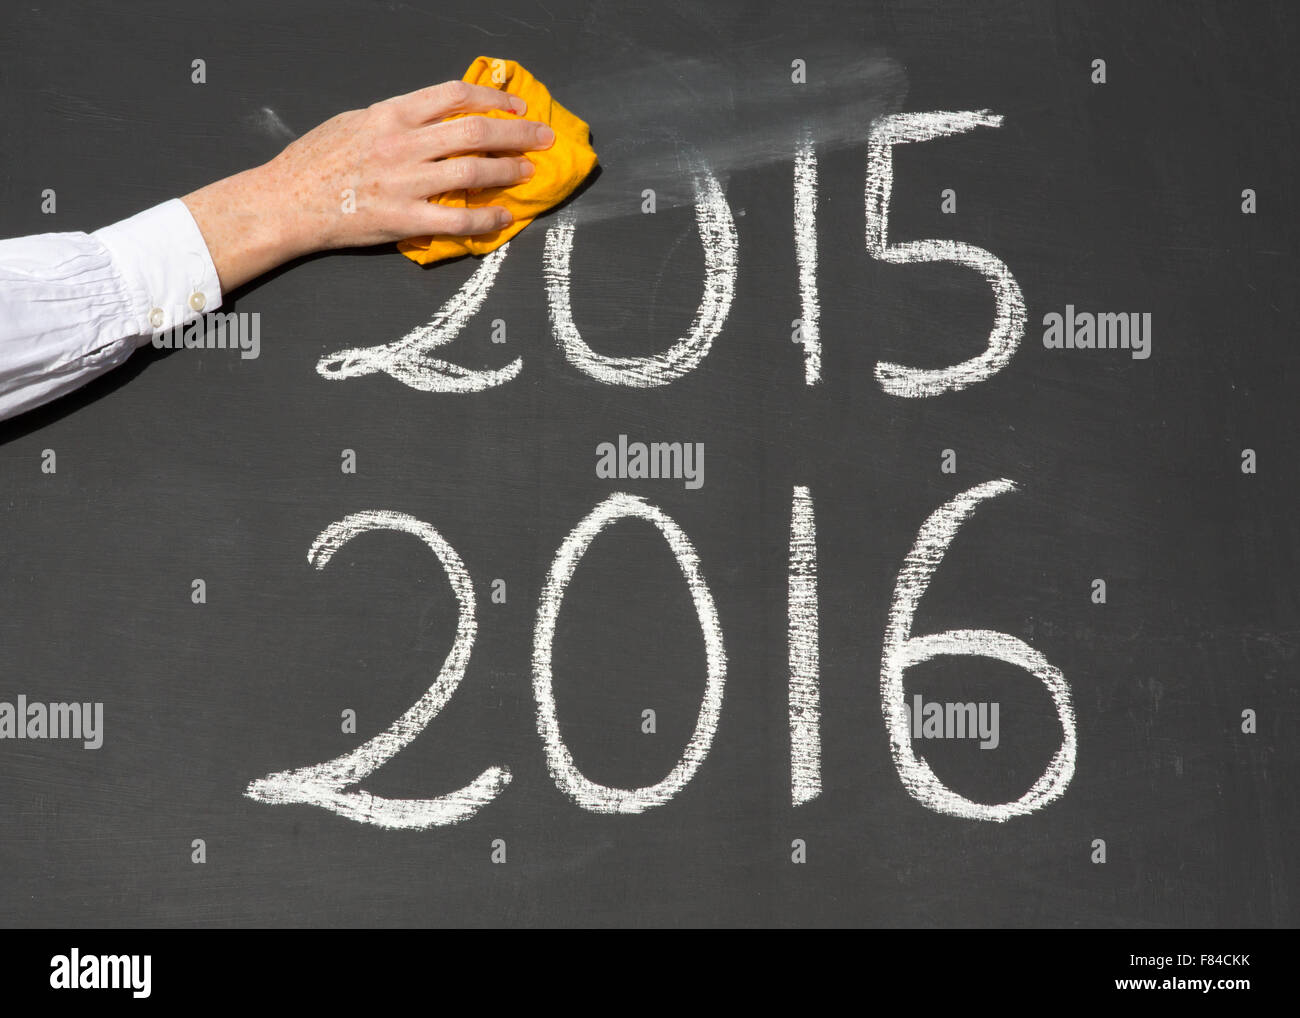 The new year is coming, with the date 2015 and 2016 written on a school blackboard, with the year 2015 being erased by a teacher Stock Photo